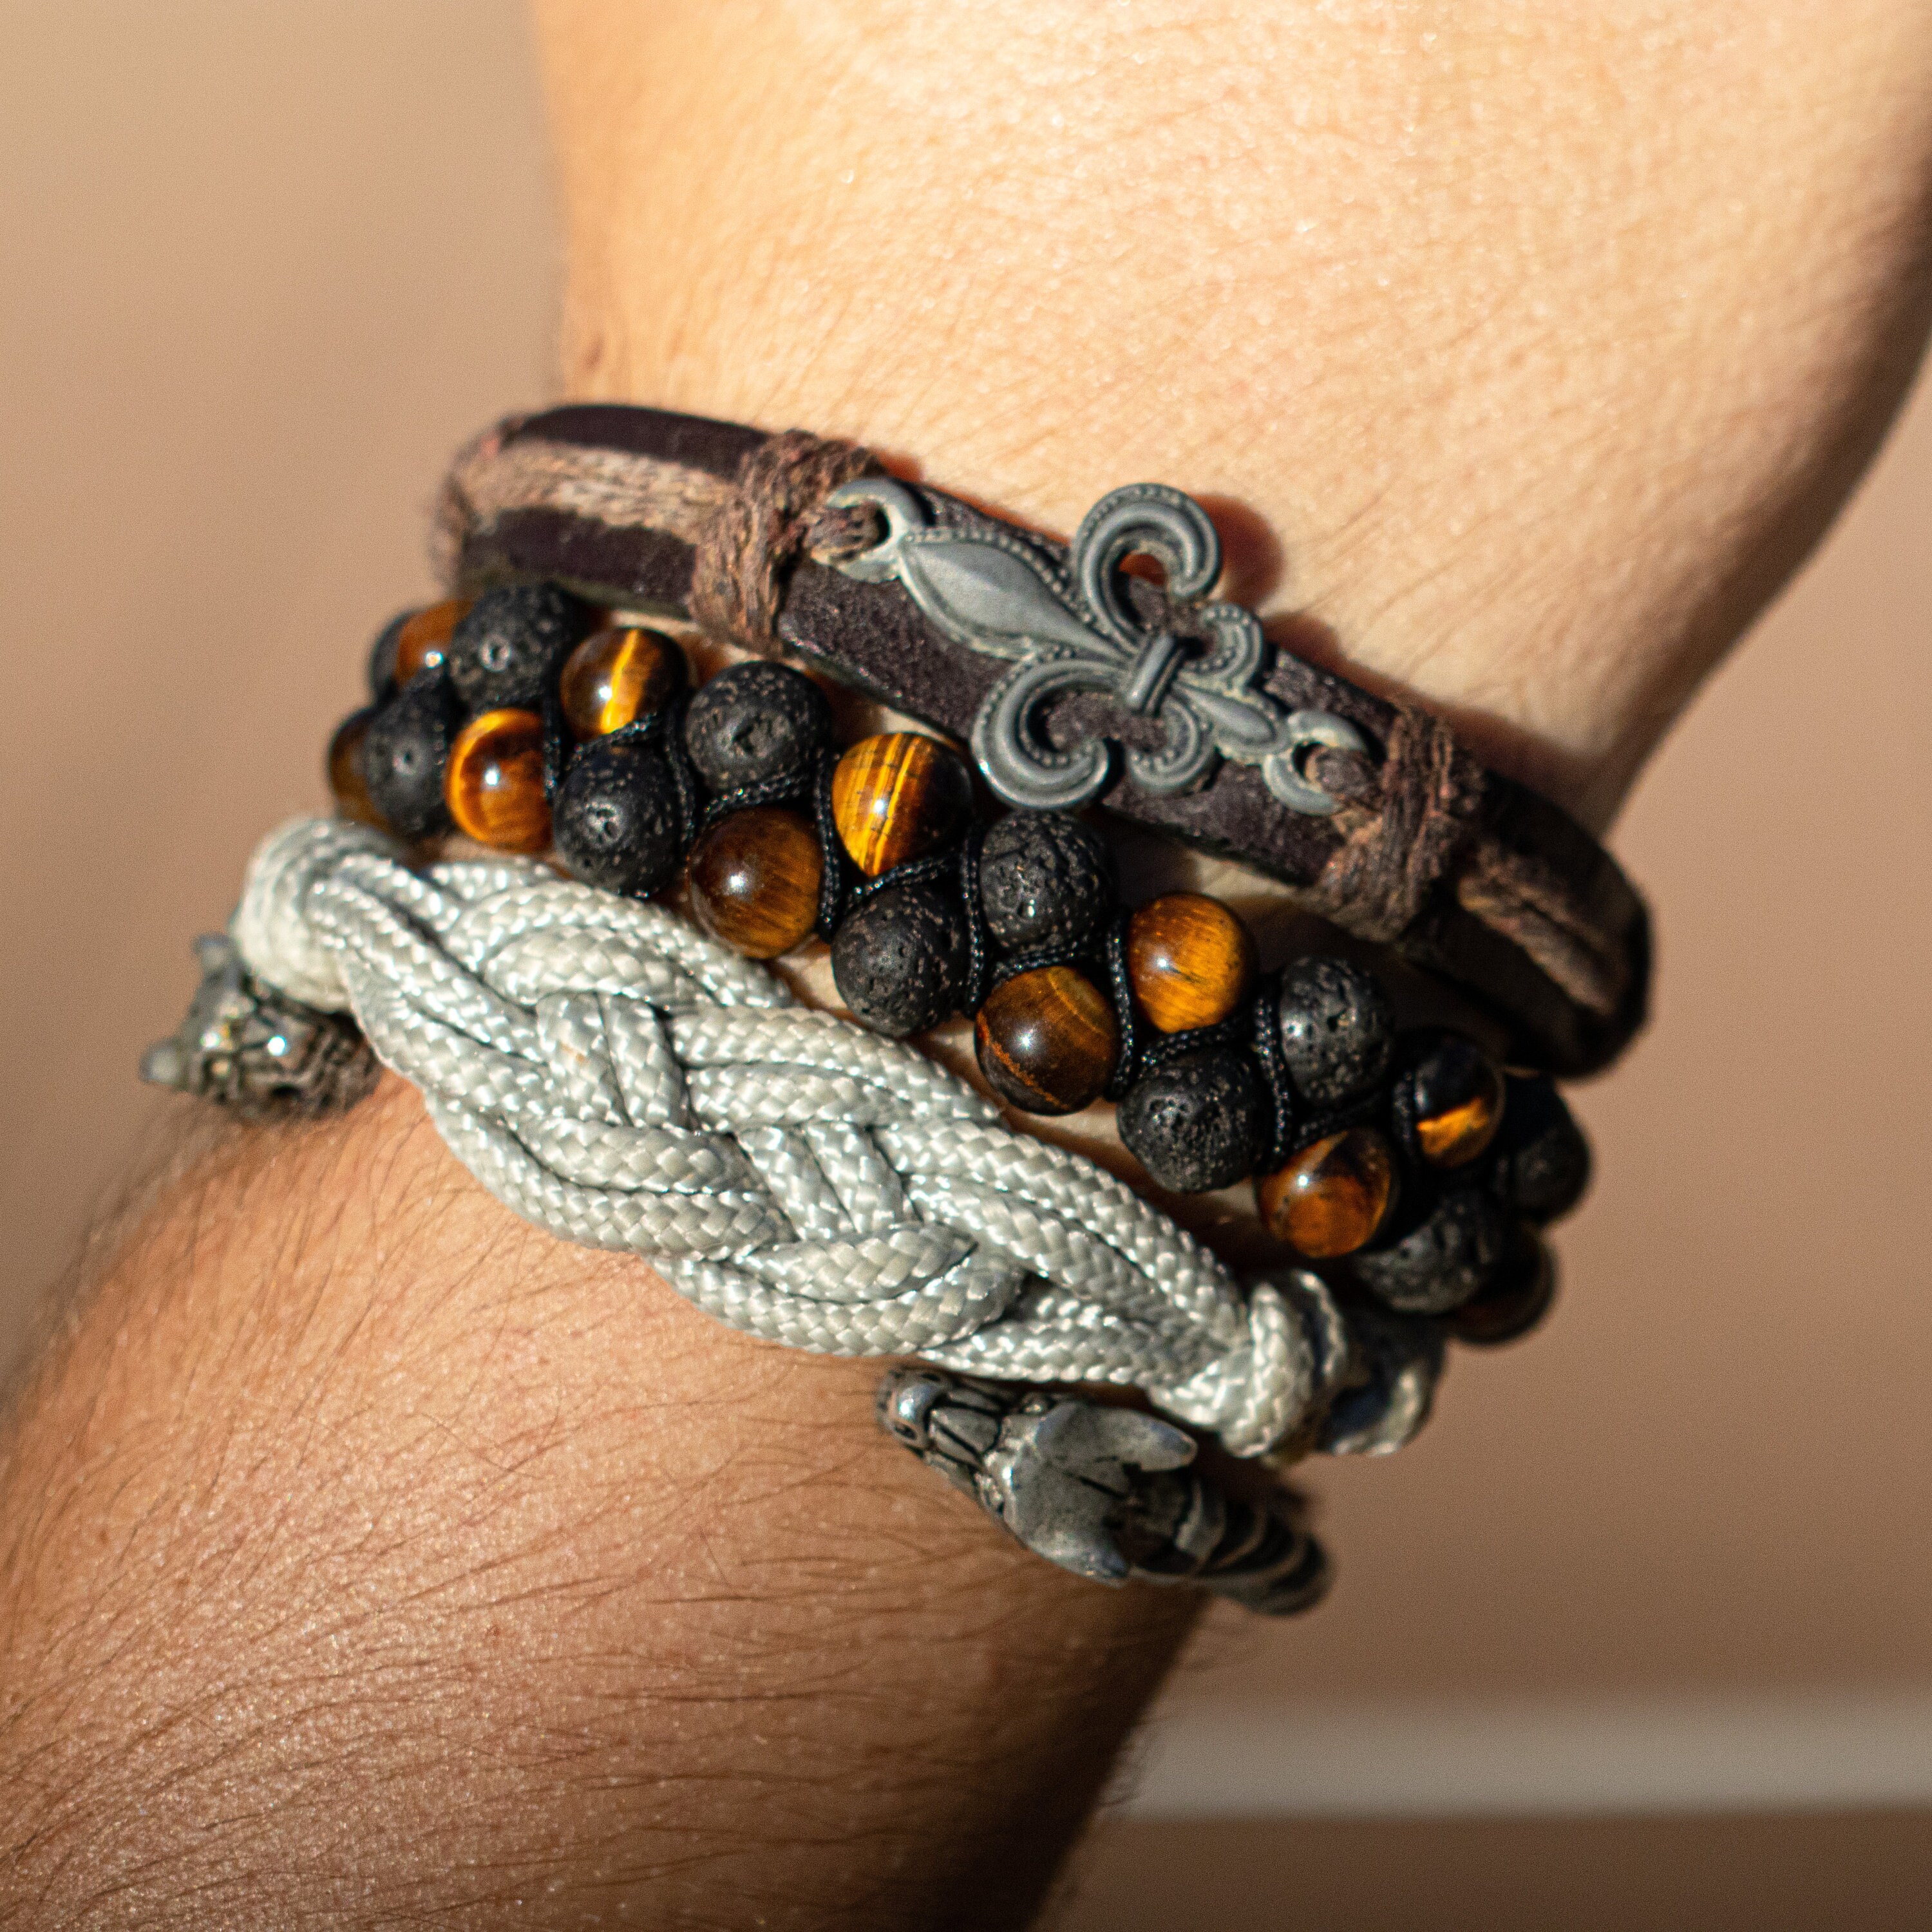 How You Can Make A Carrick Bend Bracelet With Parachute Cord  YouTube